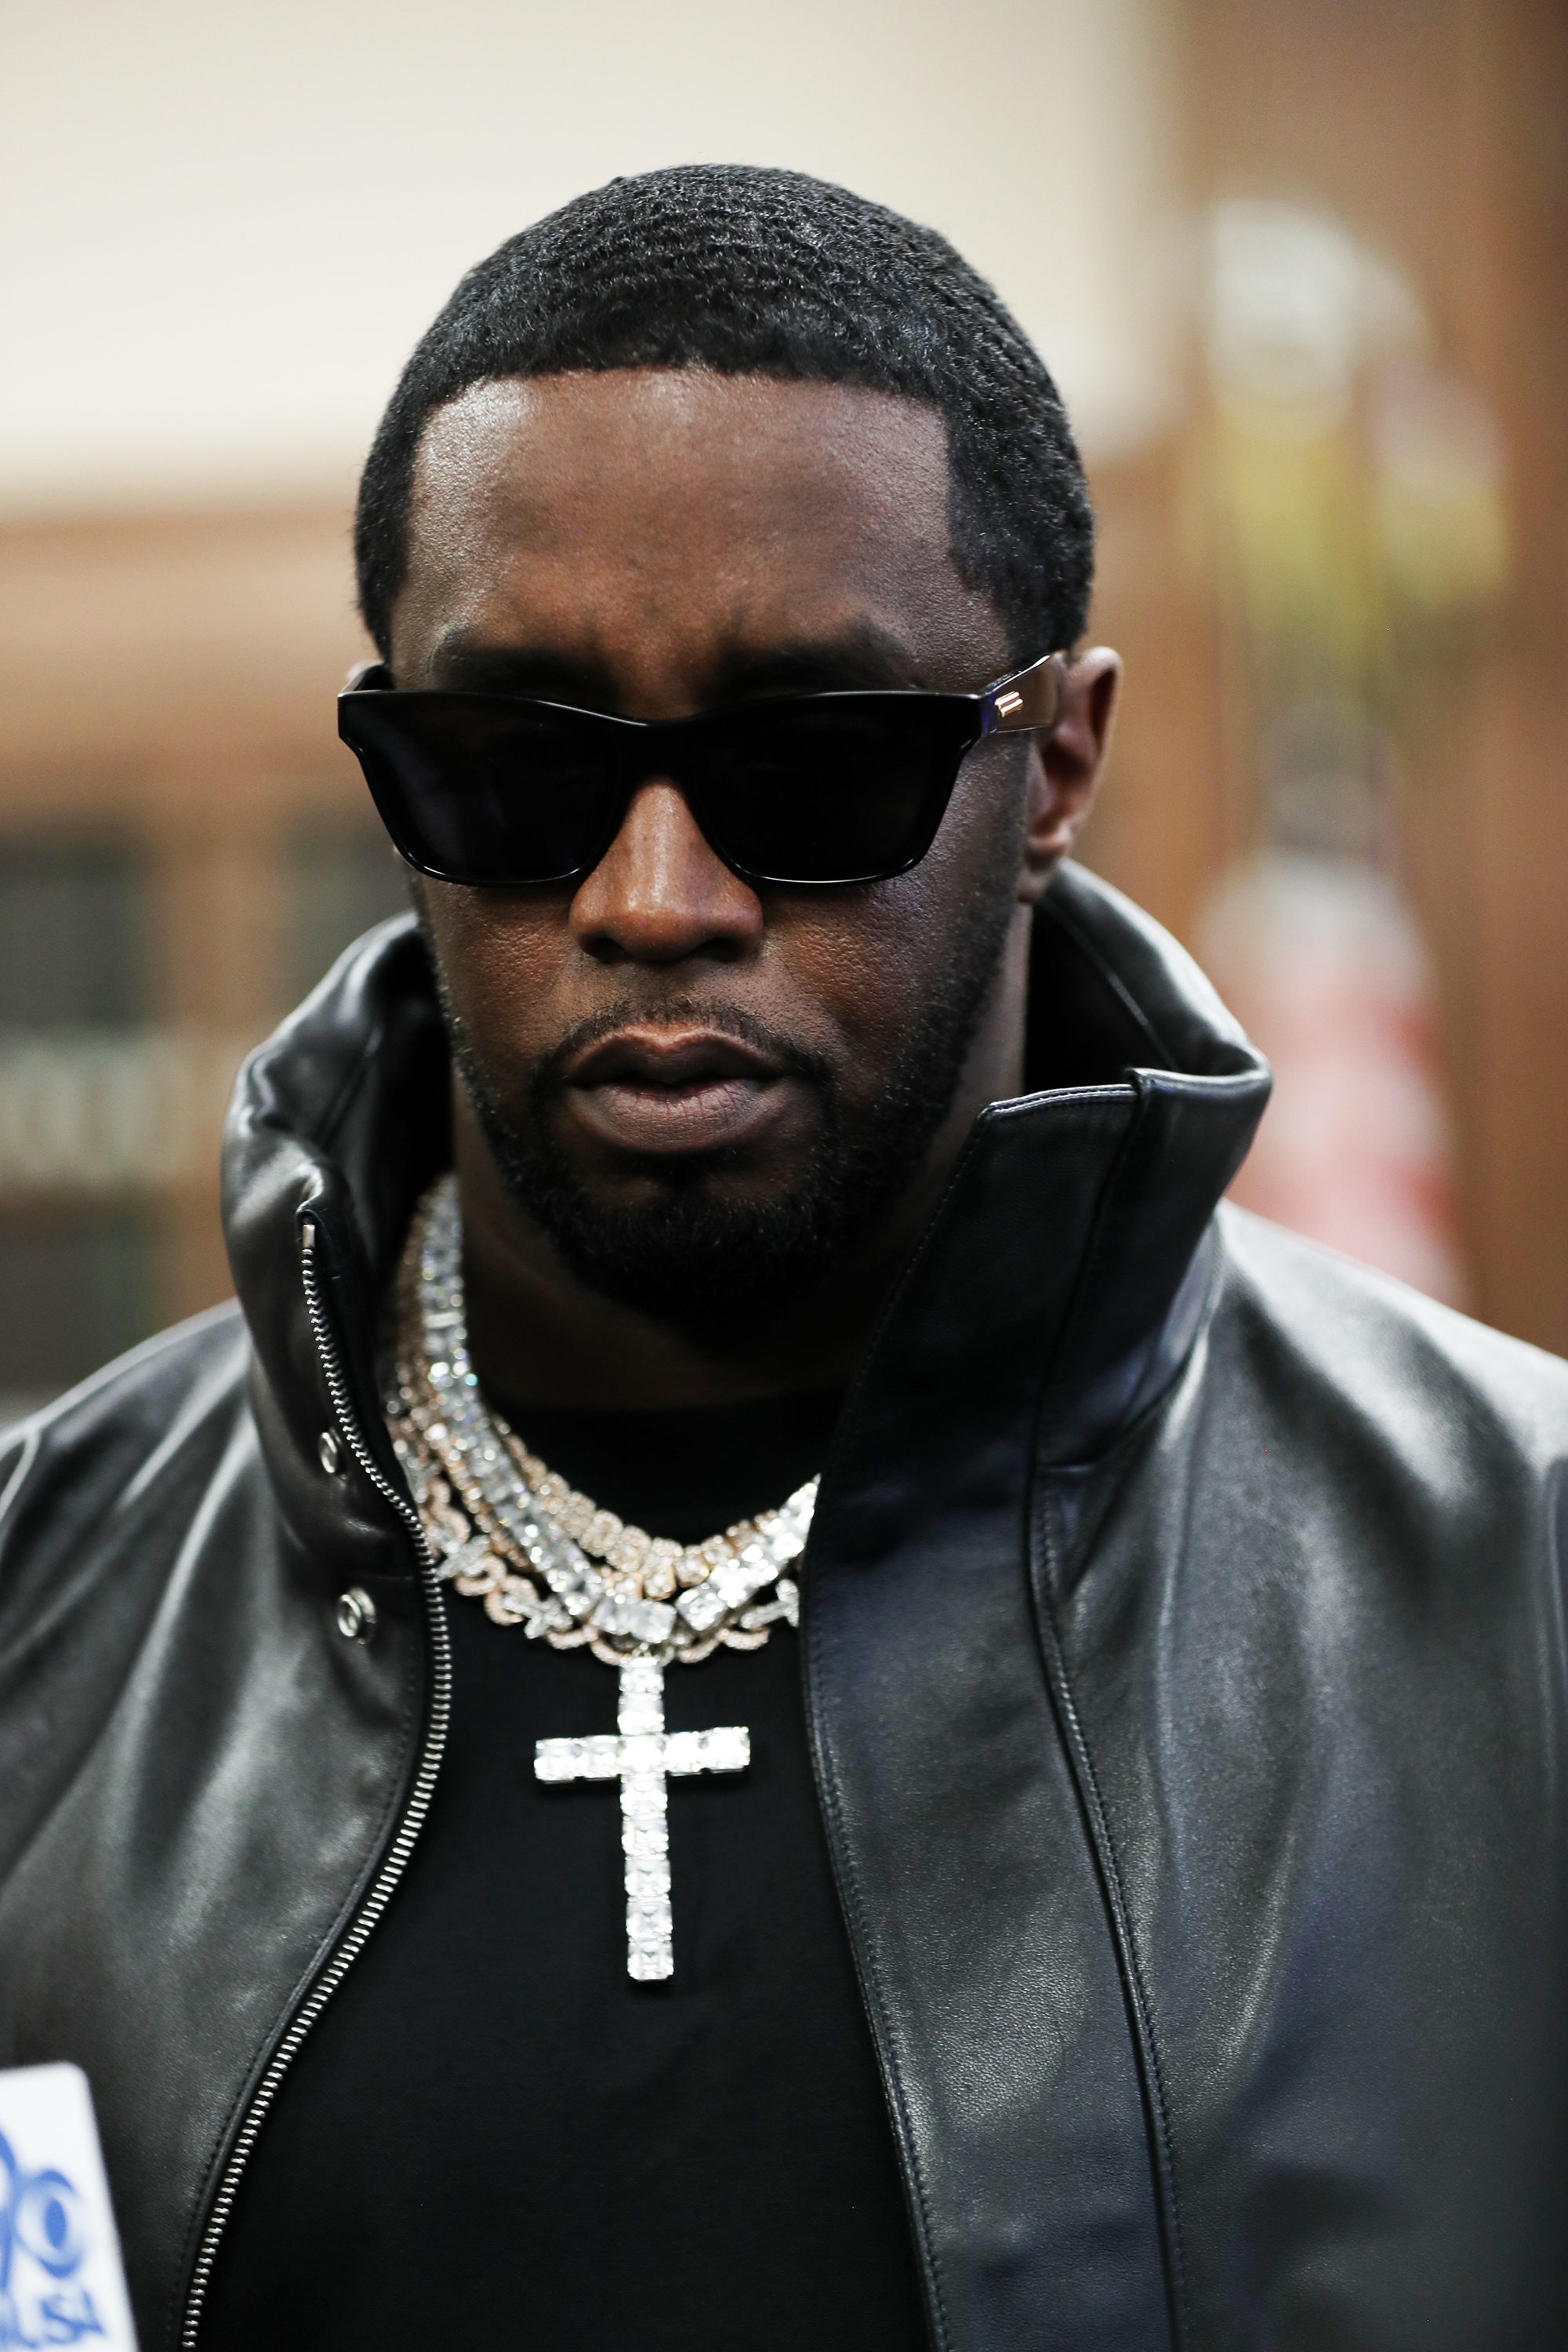 Sean Combs wears a leather jacket, sunglasses, and layered necklaces with one cross pendant. He stands in a formal setting